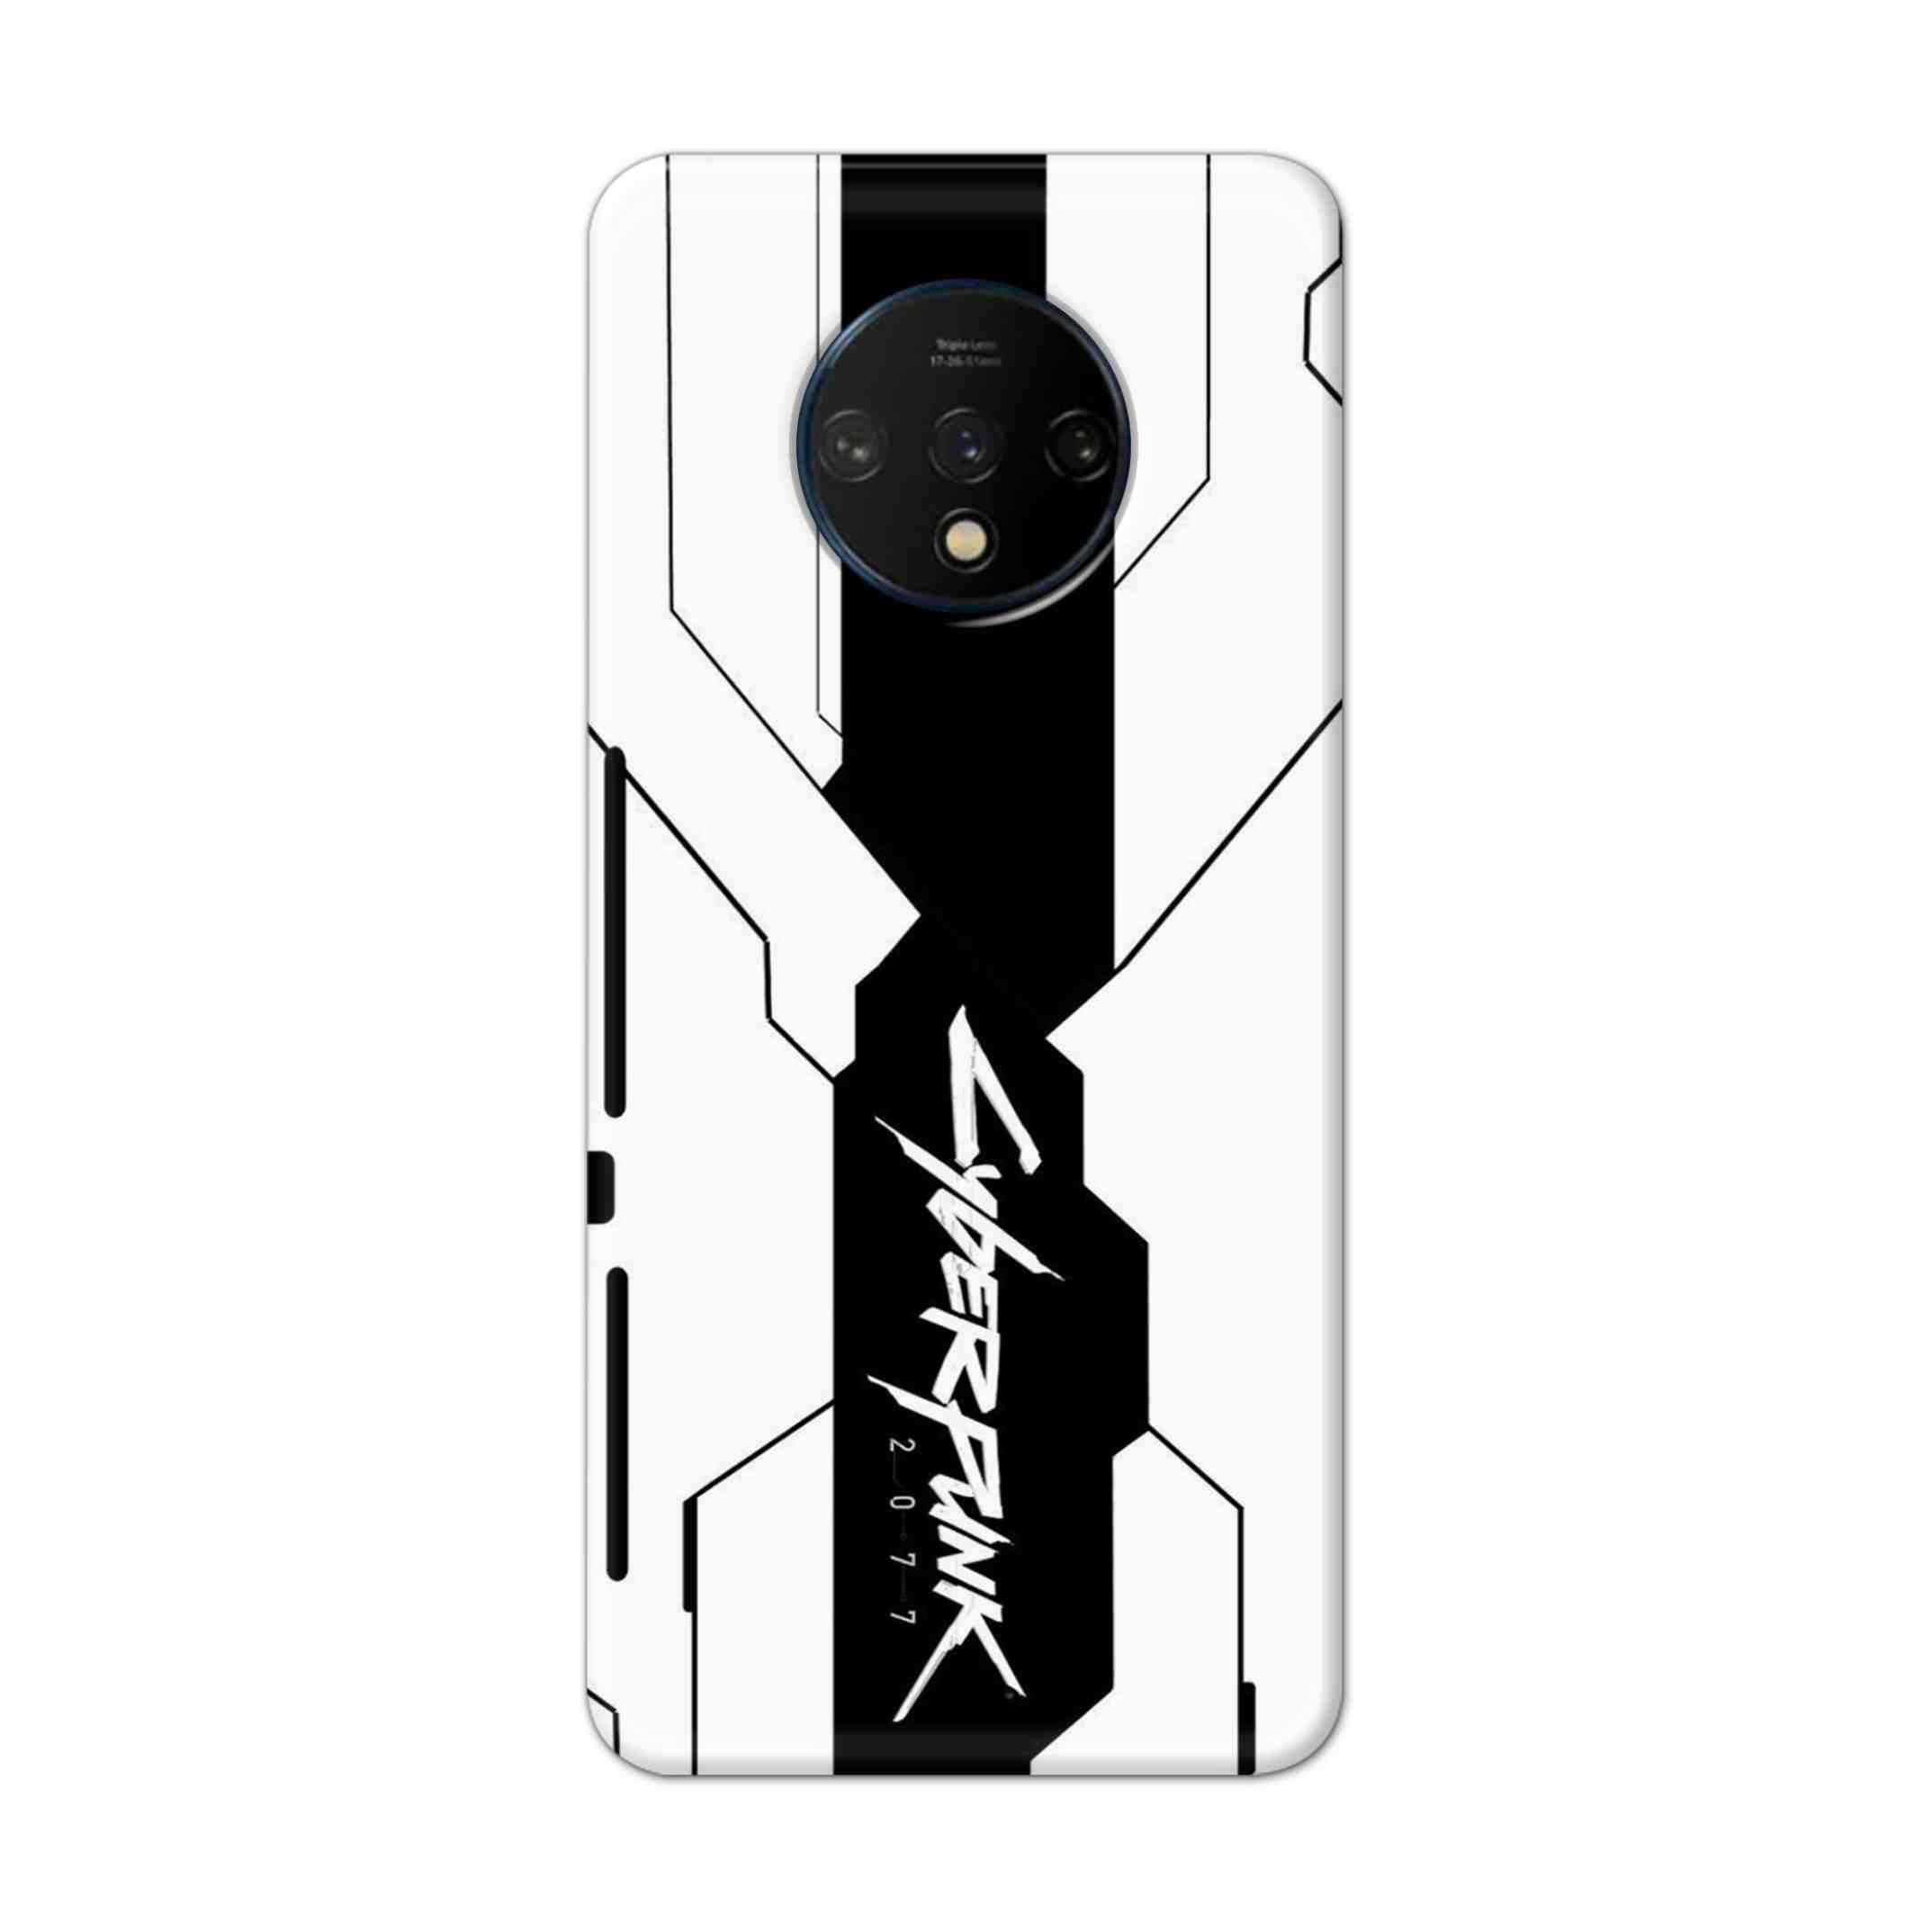 Buy Cyberpunk 2077 Hard Back Mobile Phone Case Cover For OnePlus 7T Online